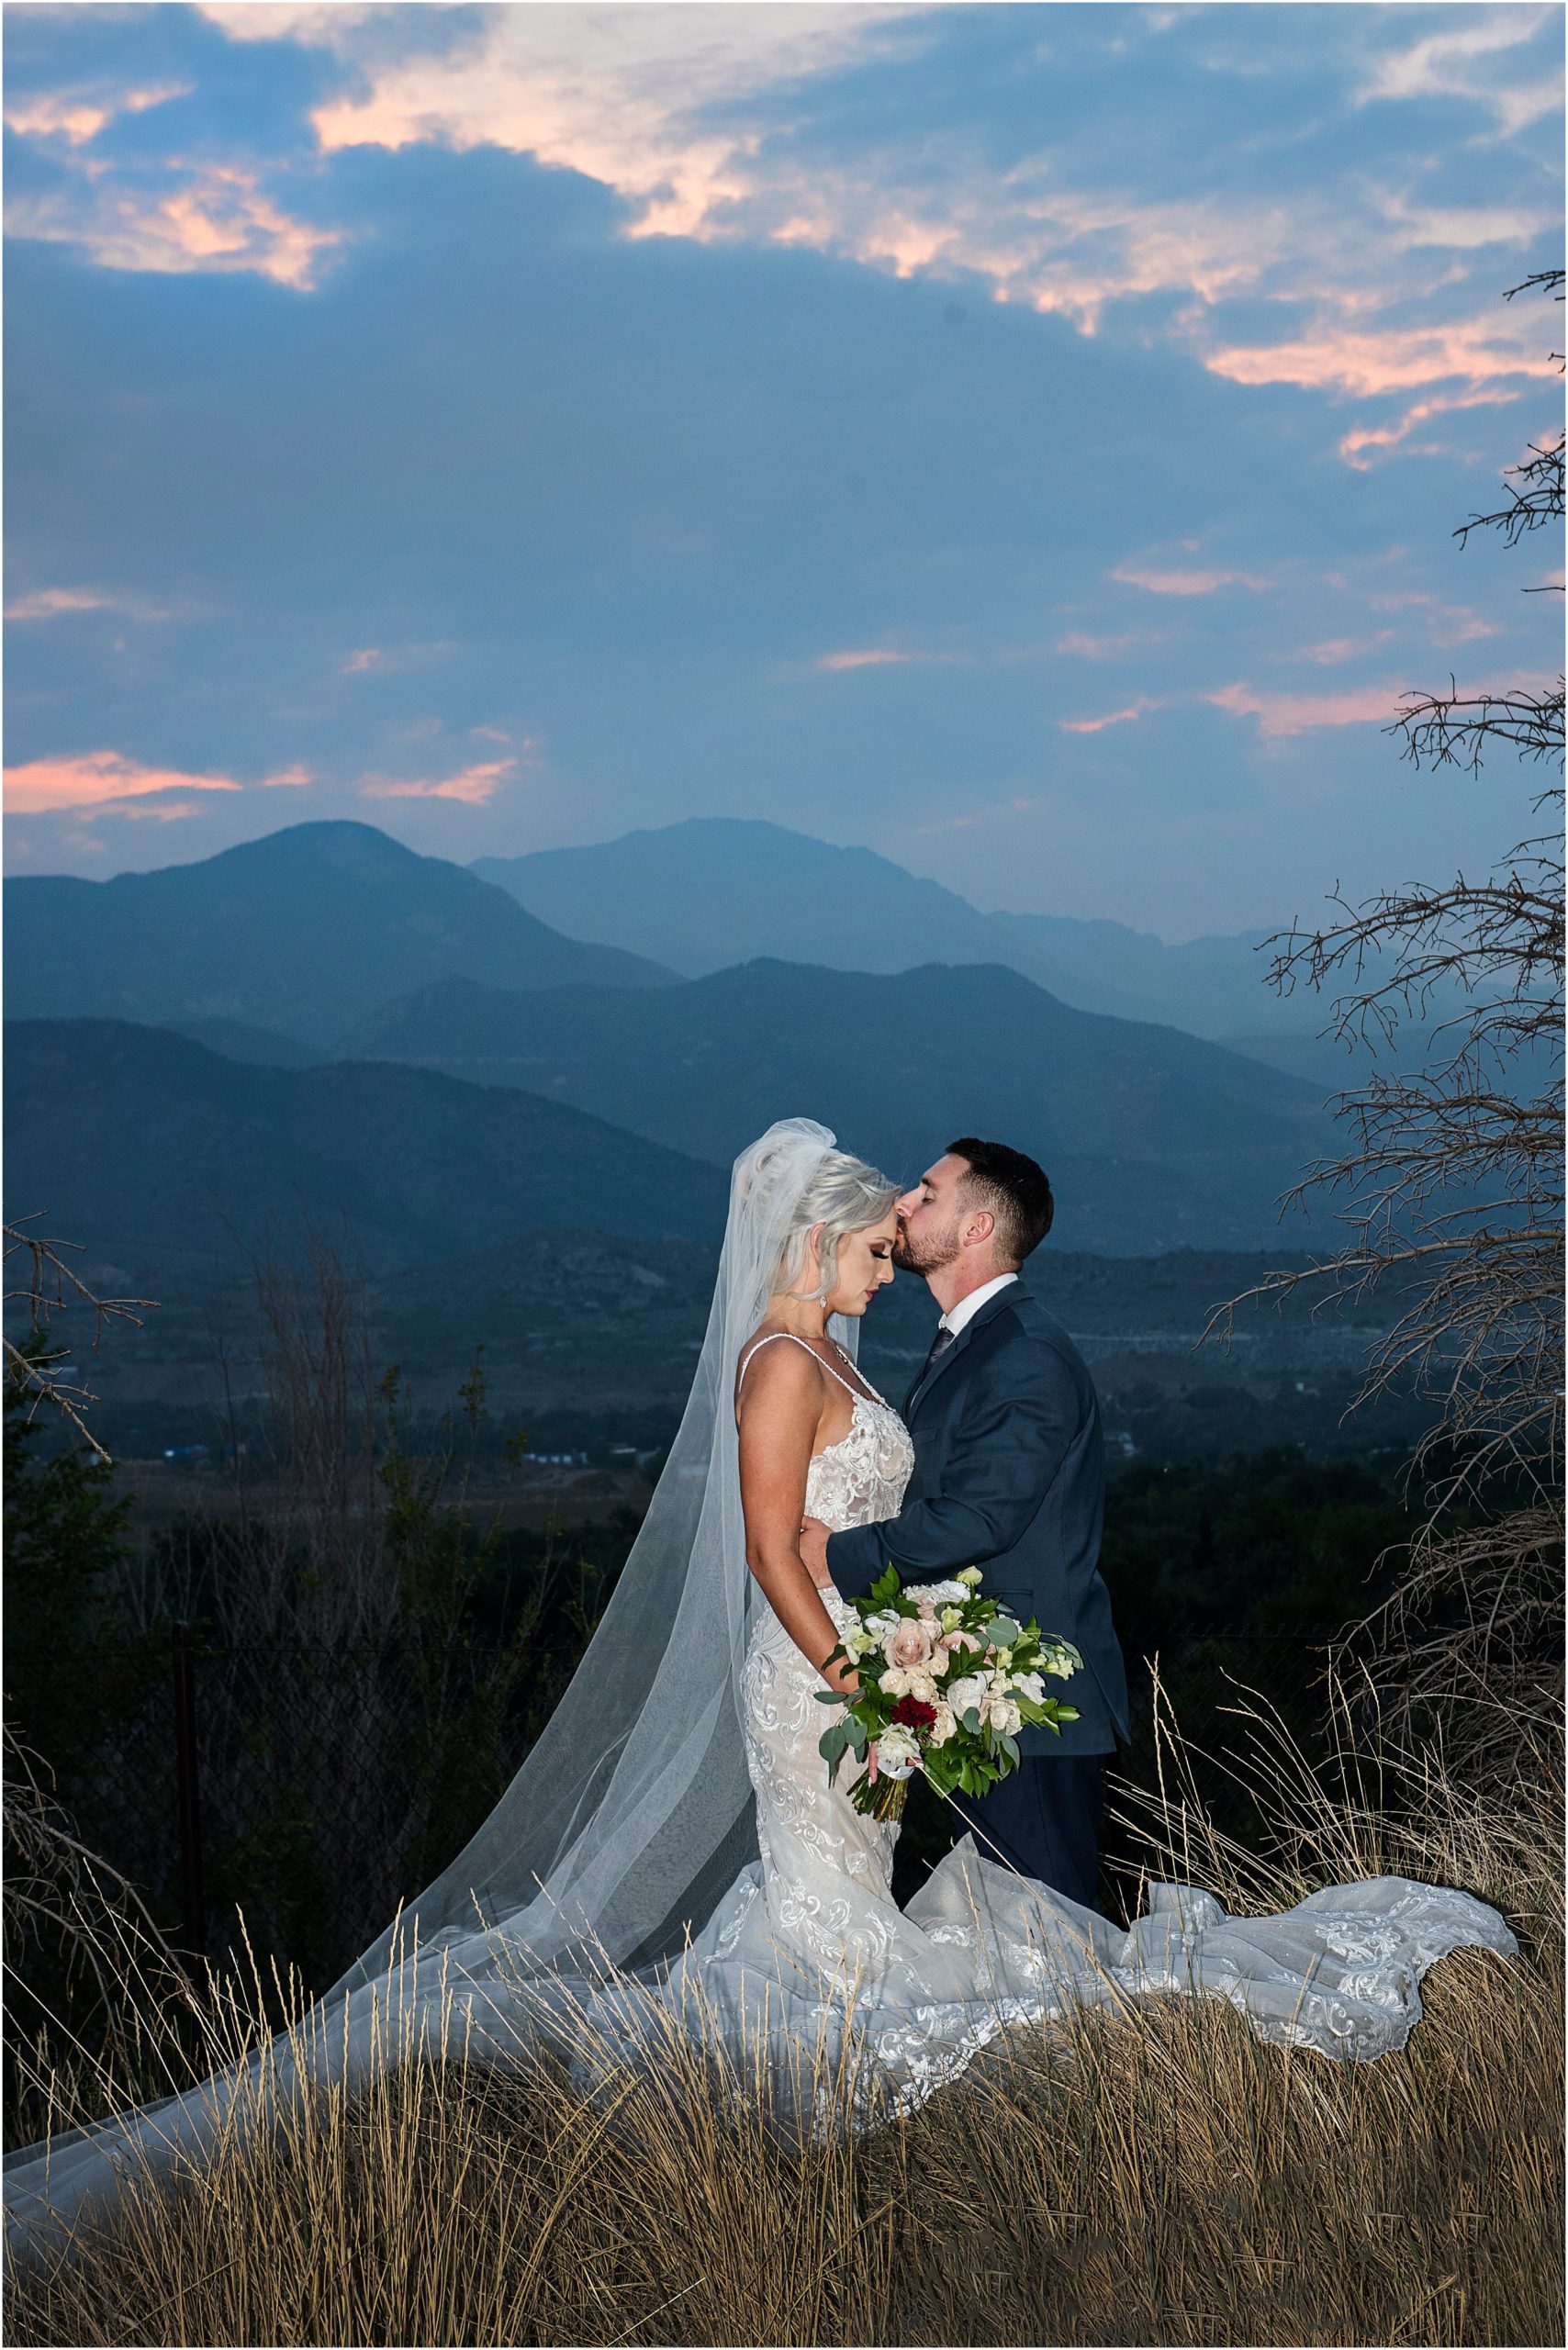 Bride and groom stand with mountains behind them after sunset as the sky shows off in colors of blue and pink with hints of purple